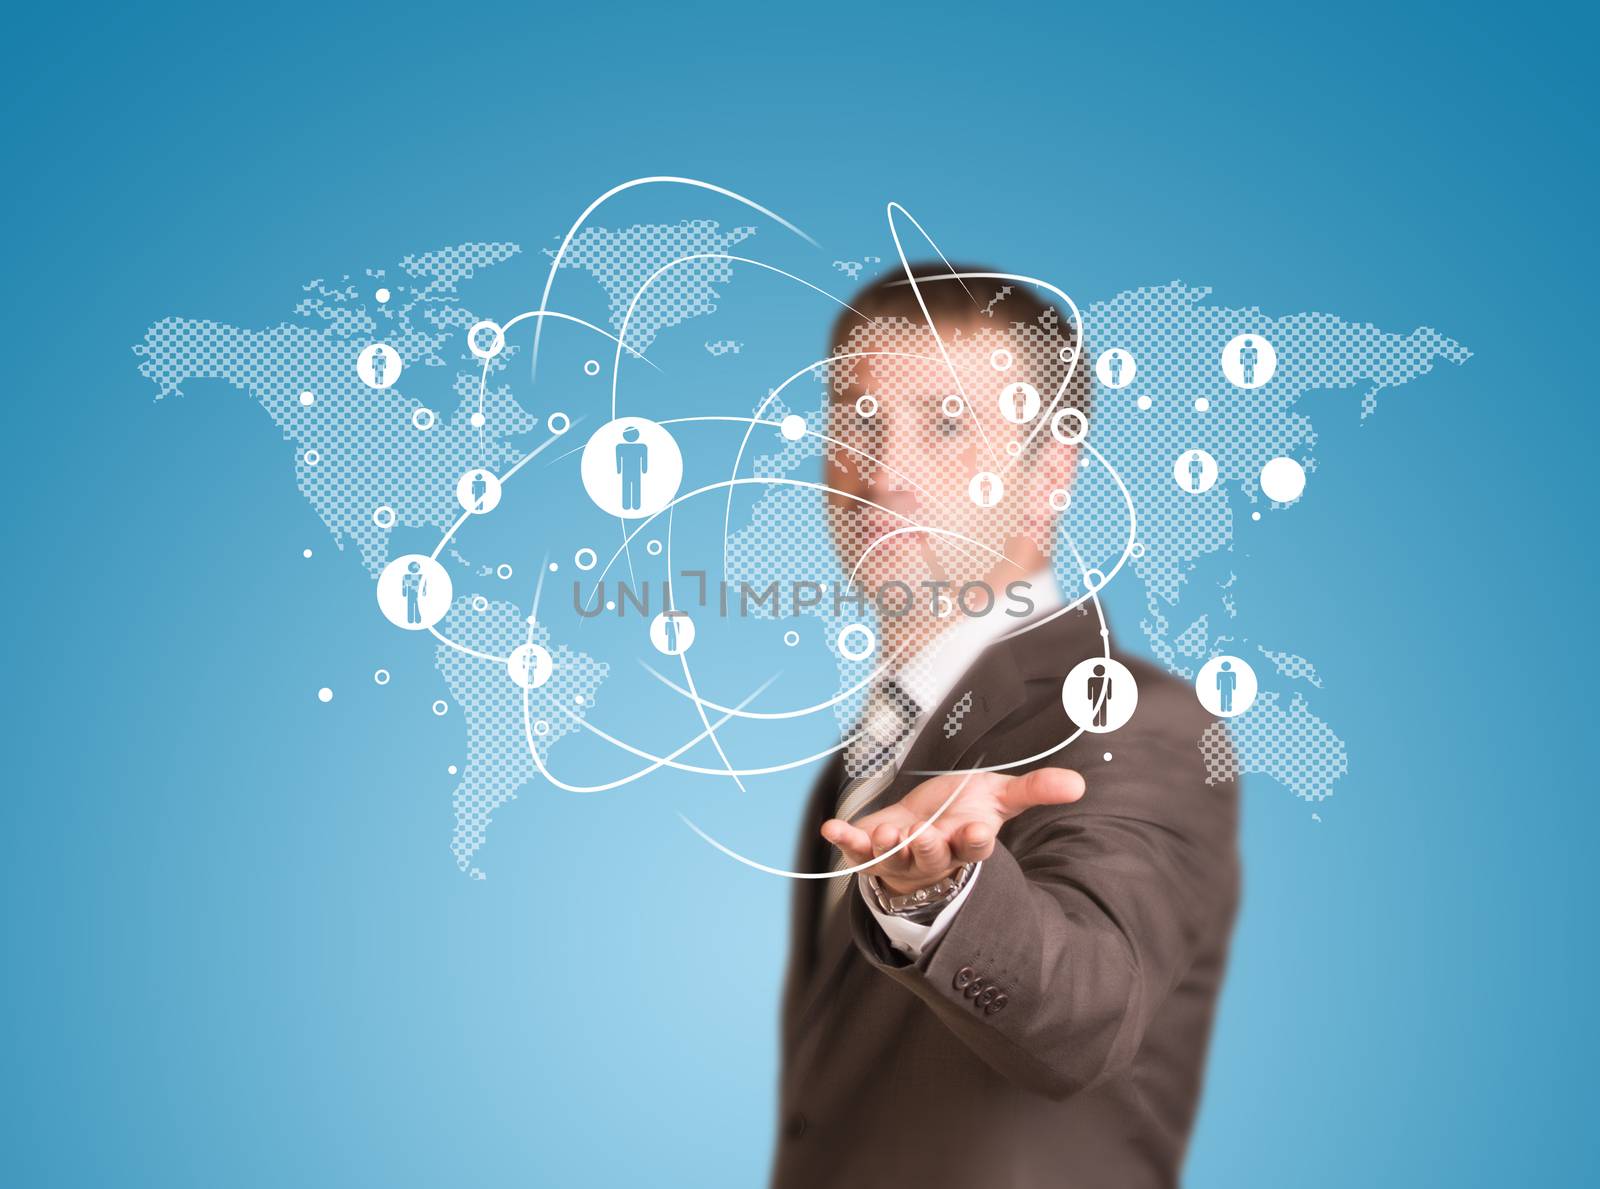 World map with contacts. Businessman in a suit as backdrop